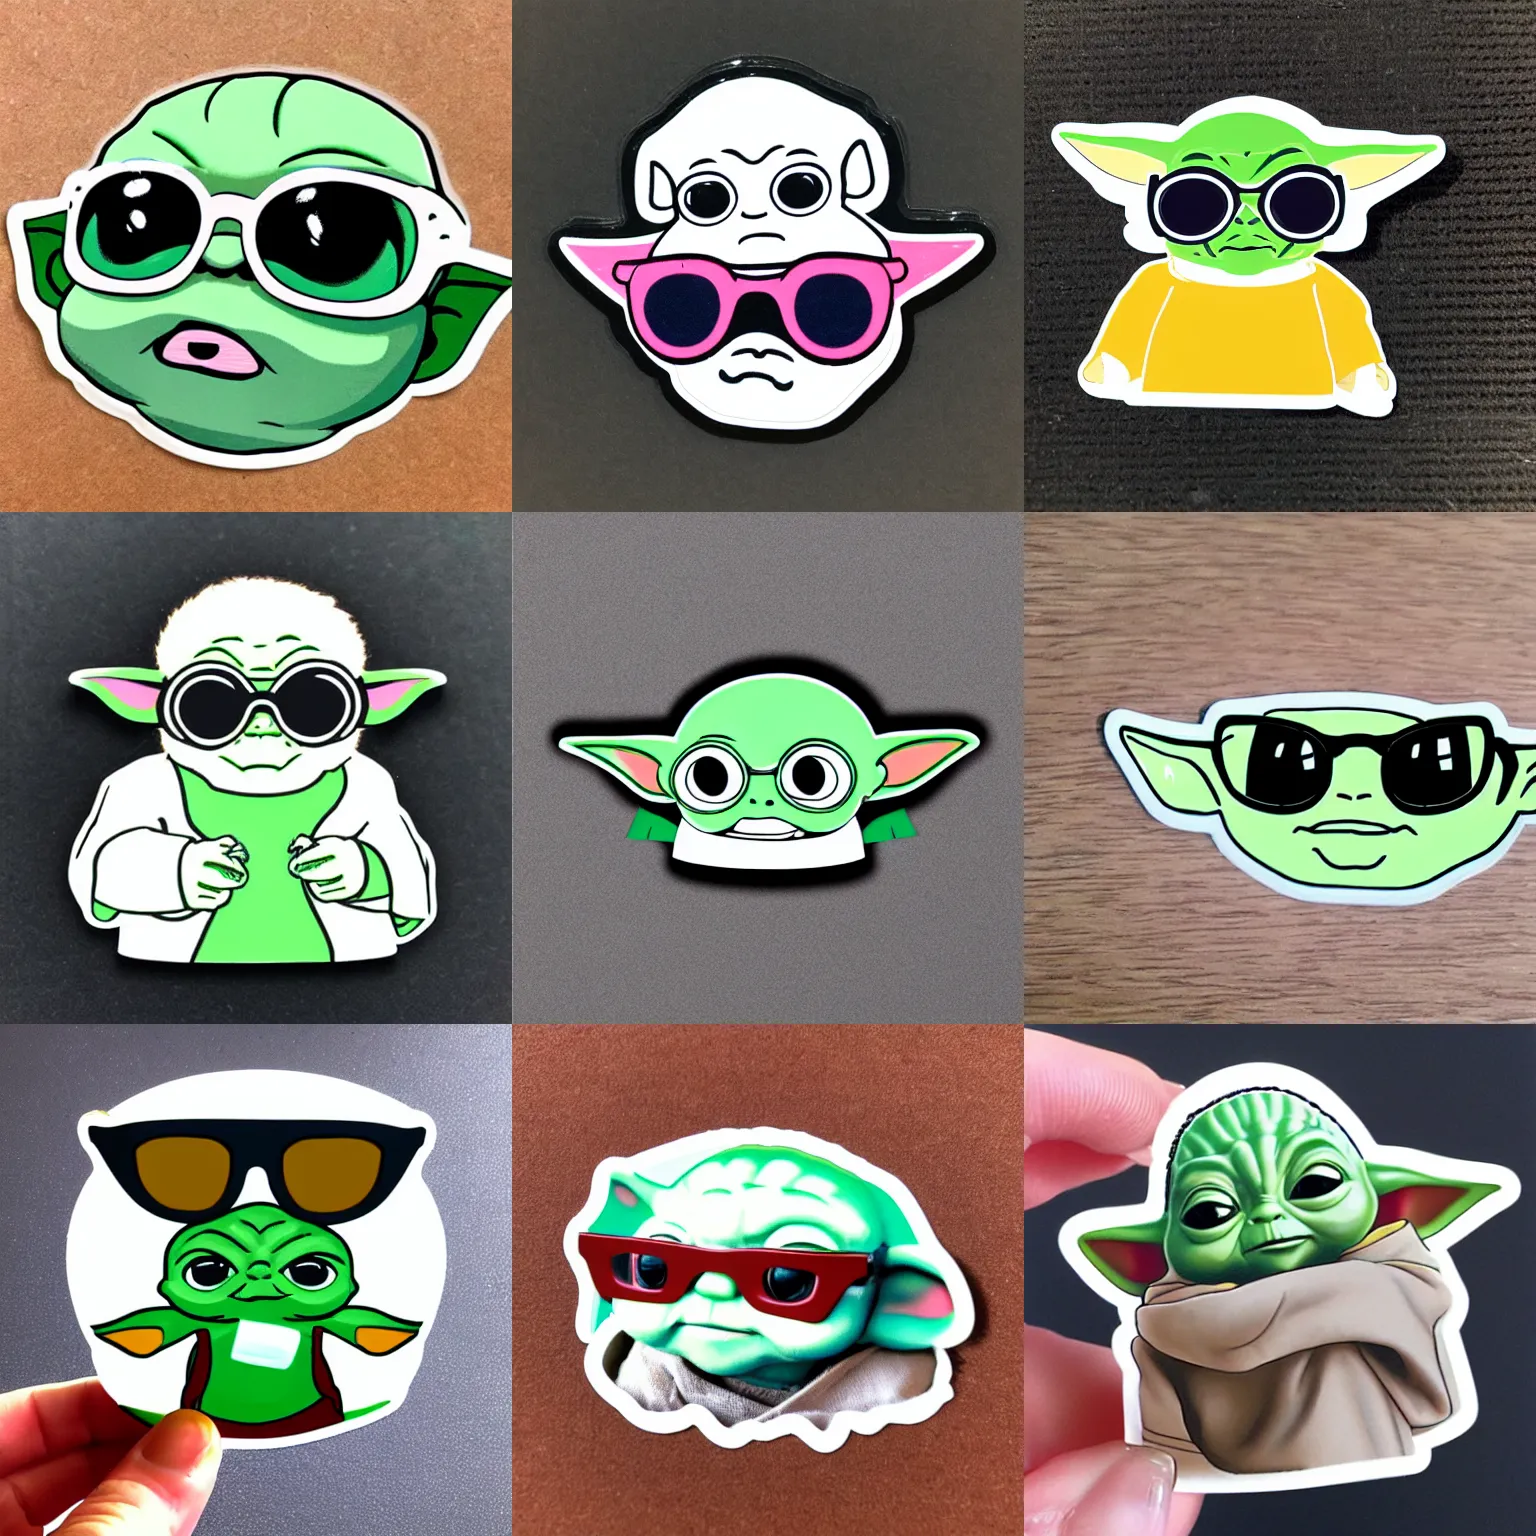 Prompt: Sticker of baby yoda with white acne studios mustang glasses on, page scan, sticker